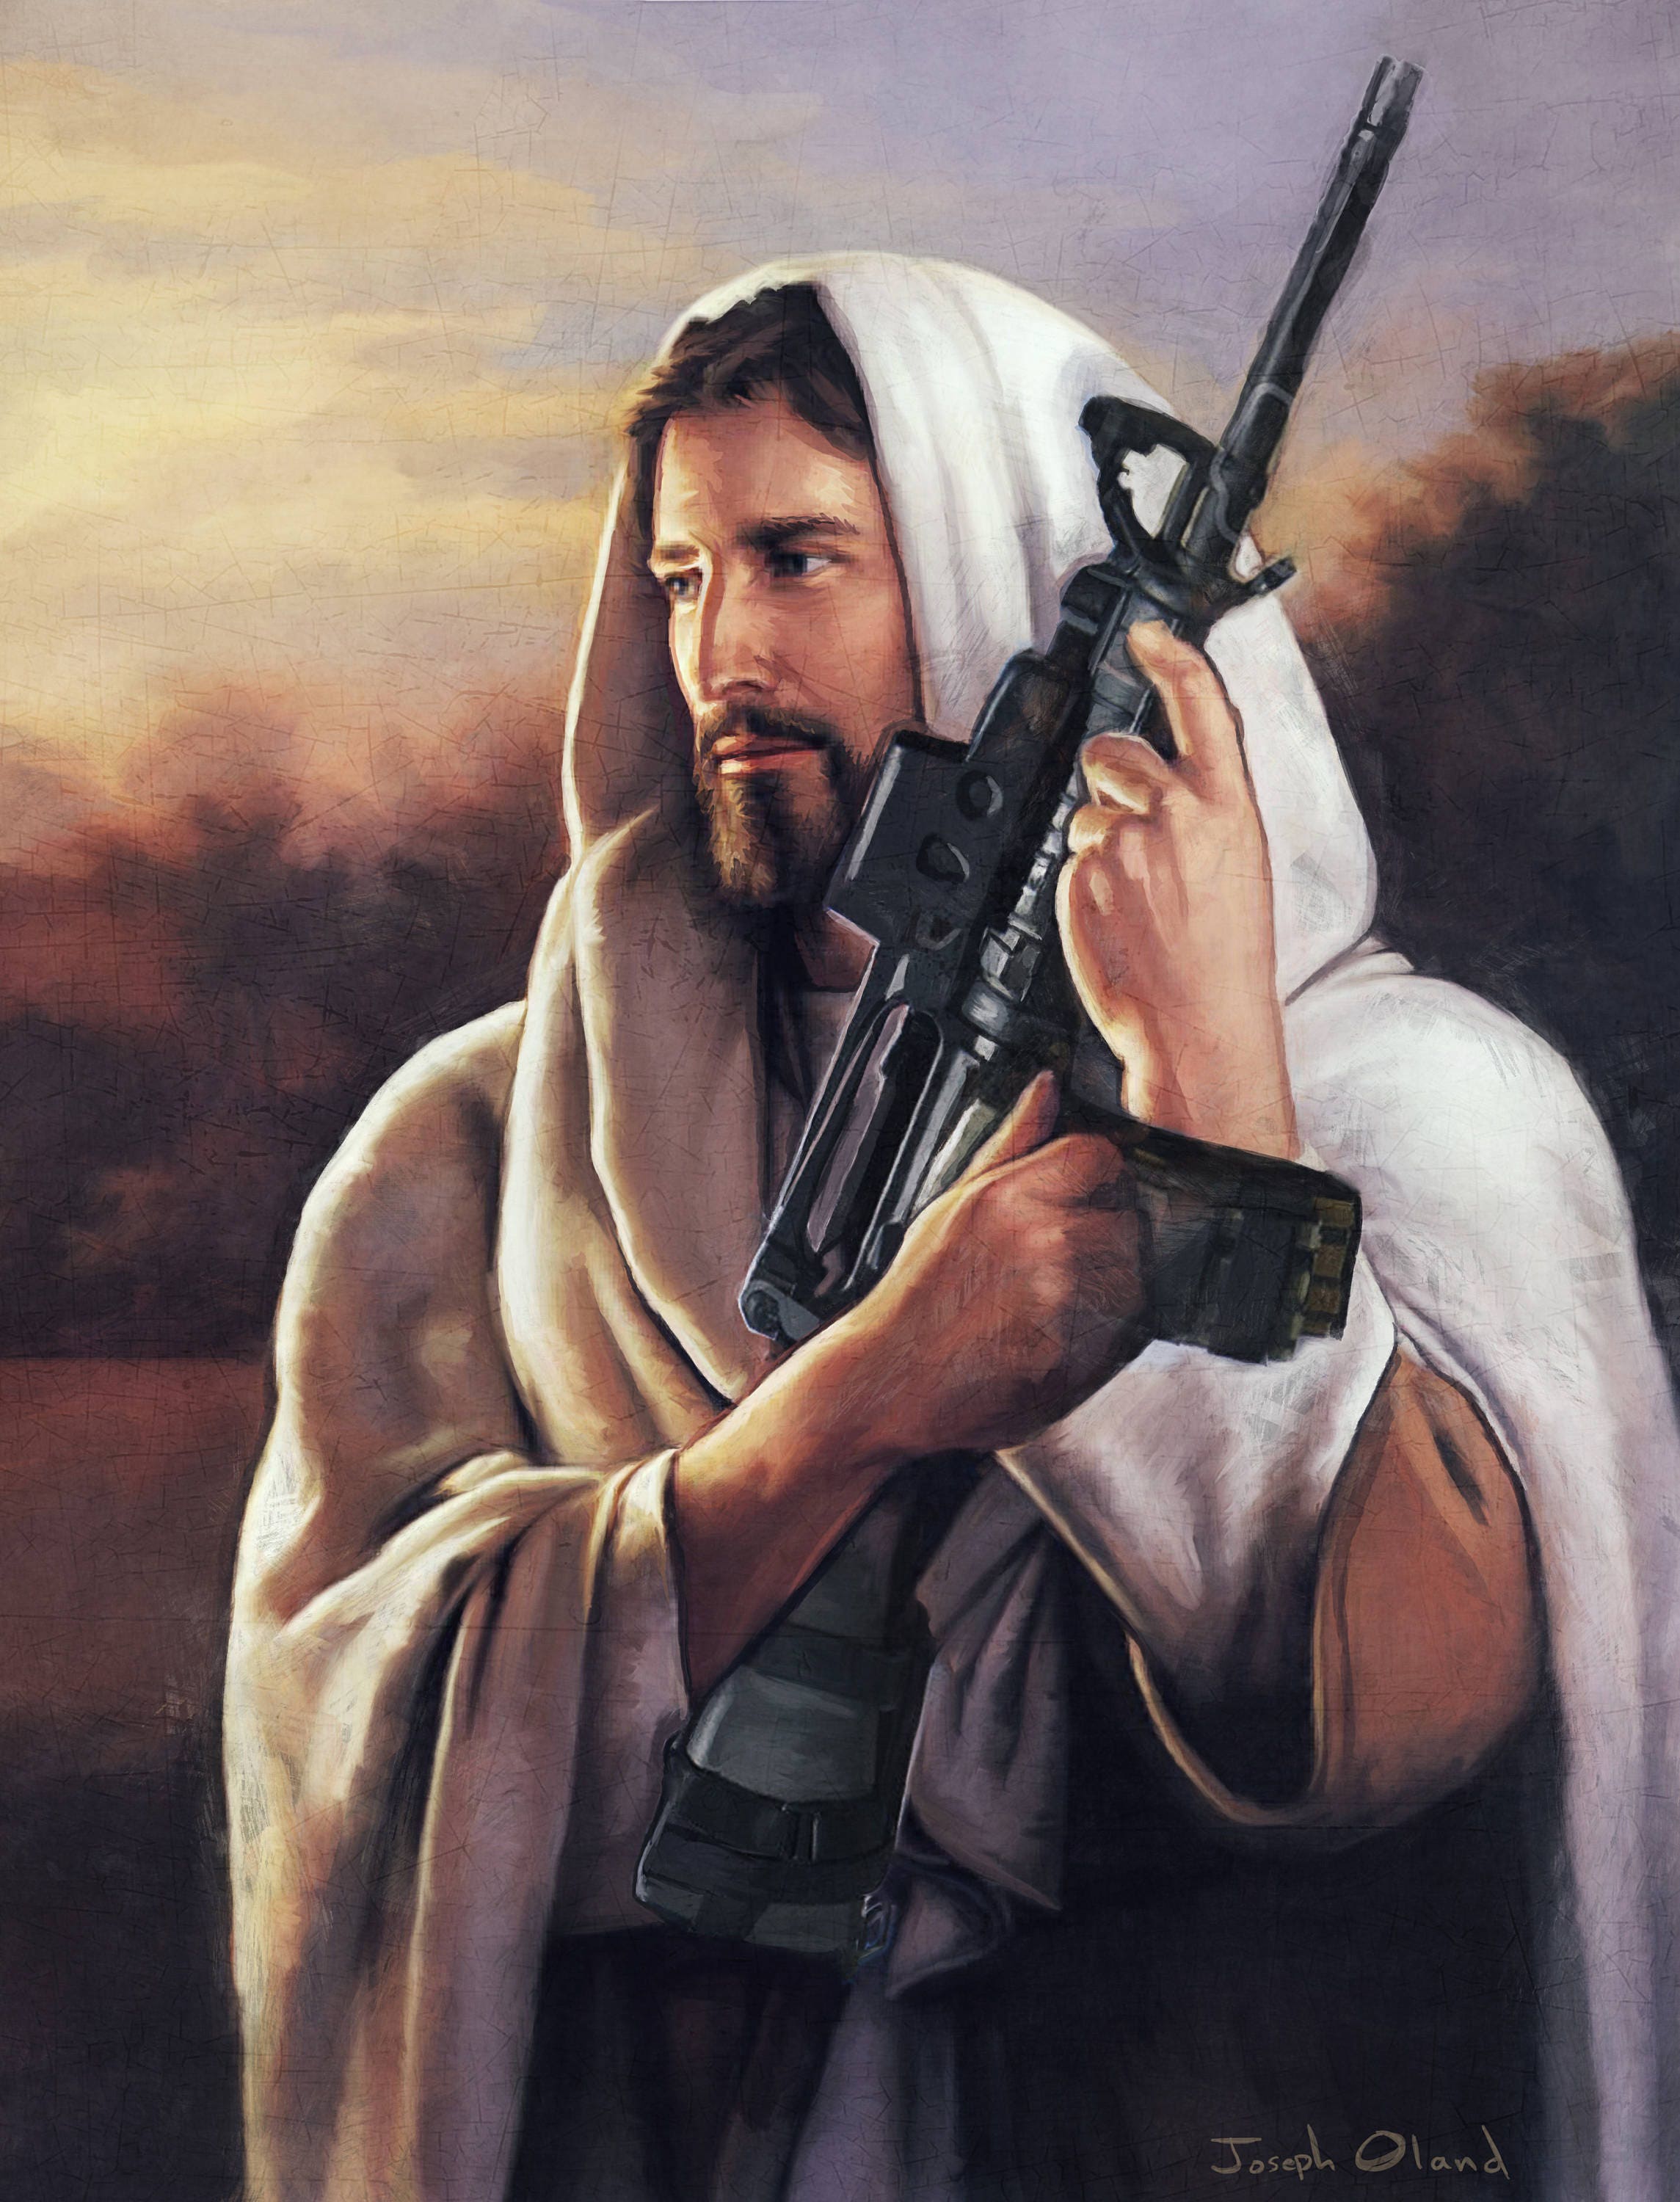 Painting of Jesus holding an assault rifle.